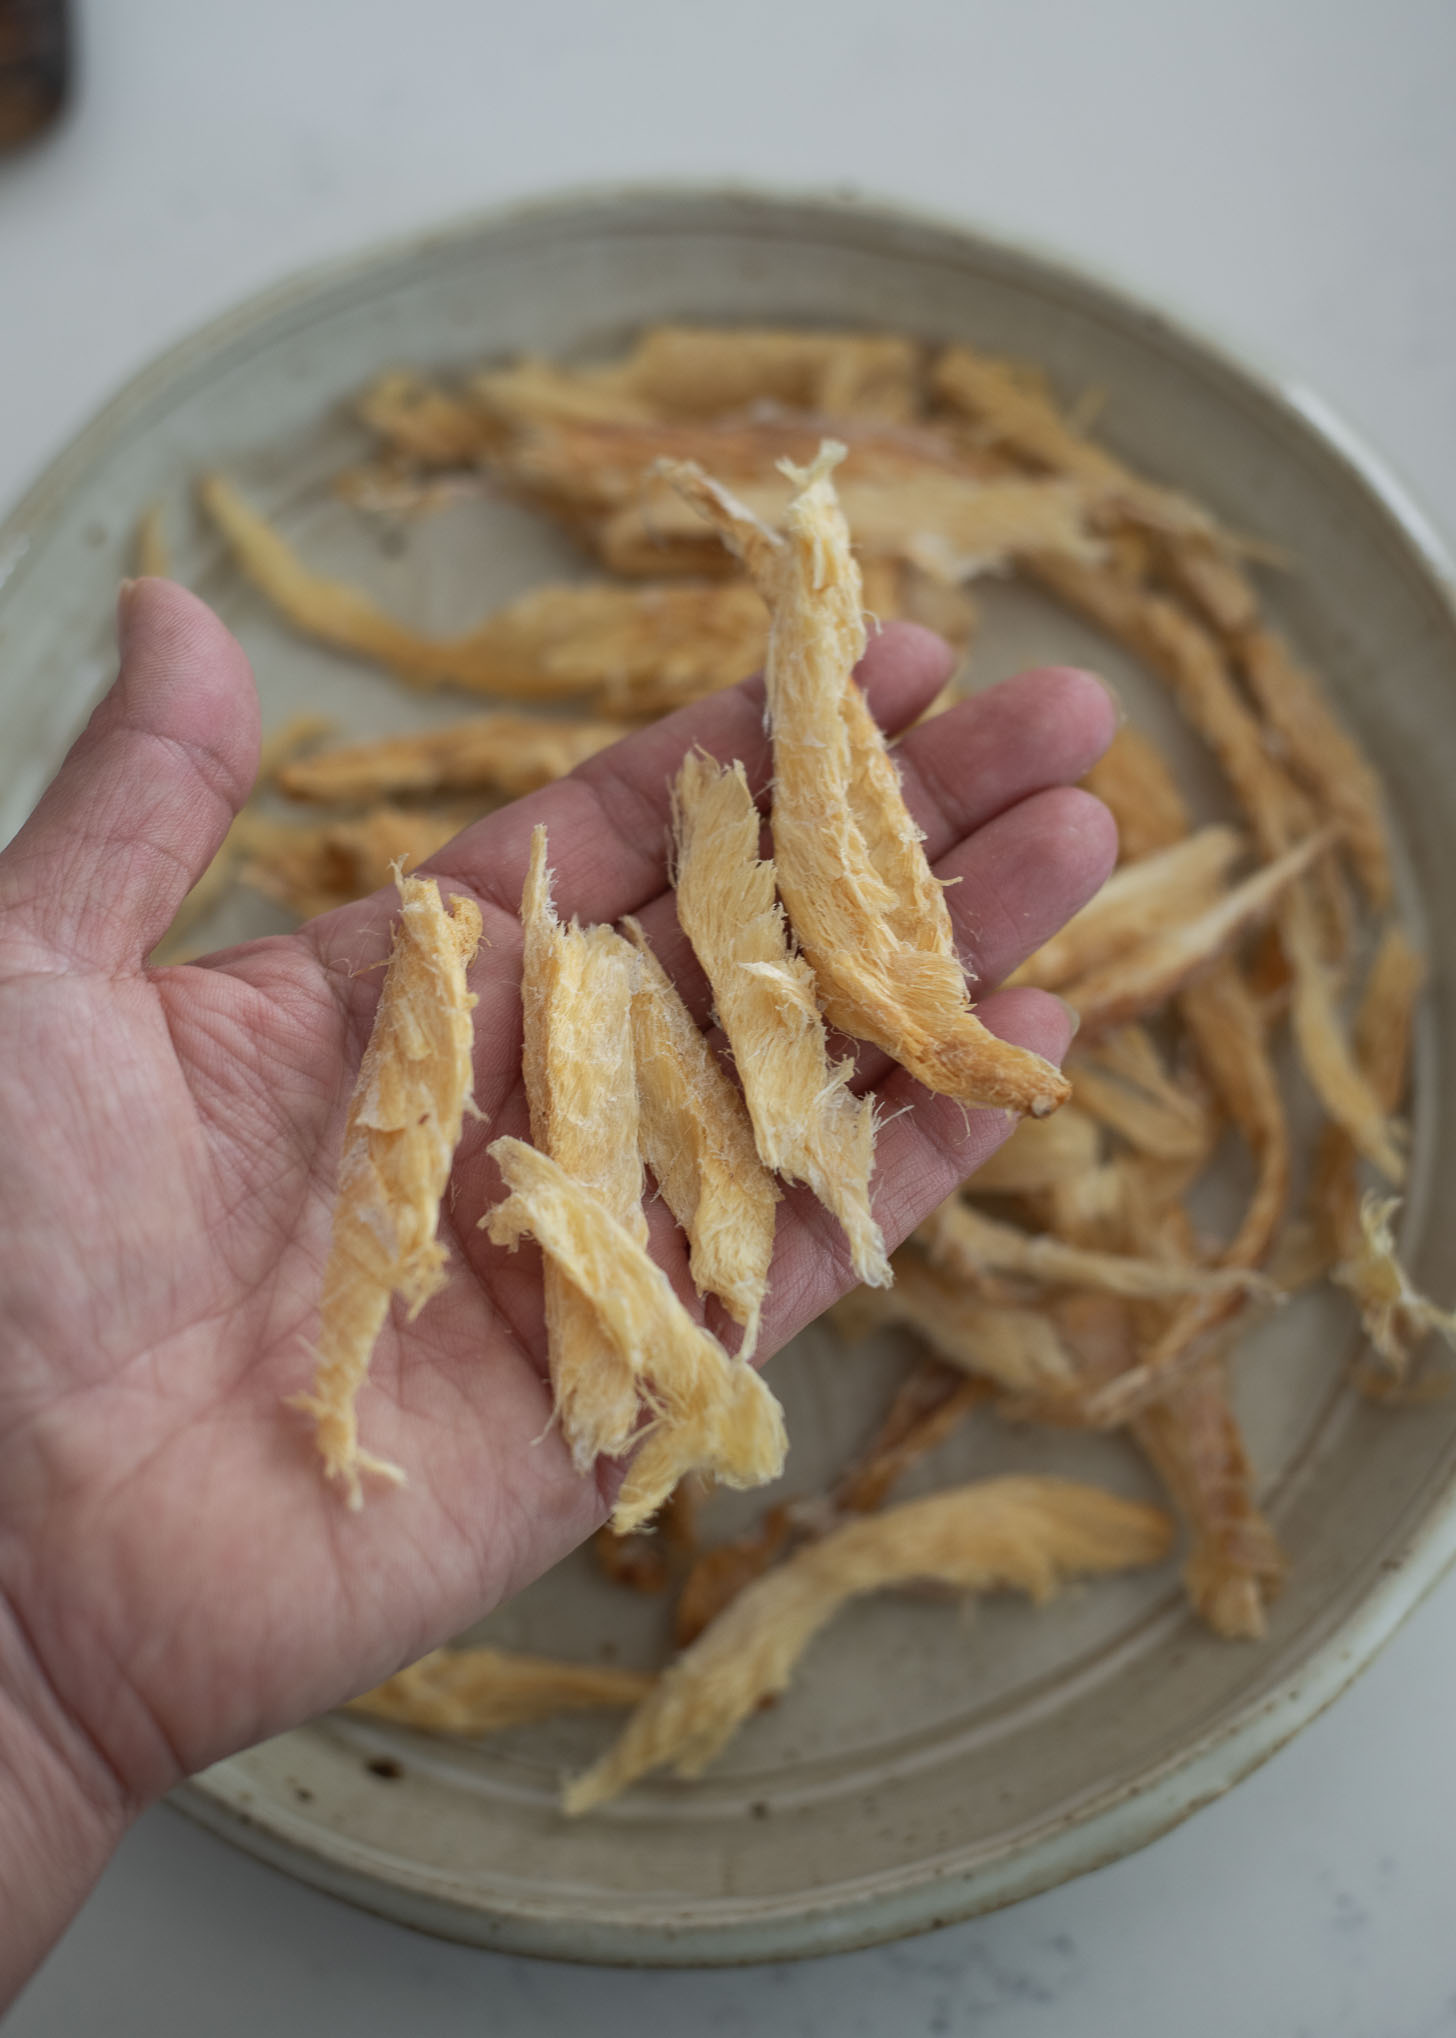 Shredded dried pollock is torn into bite size pieces.